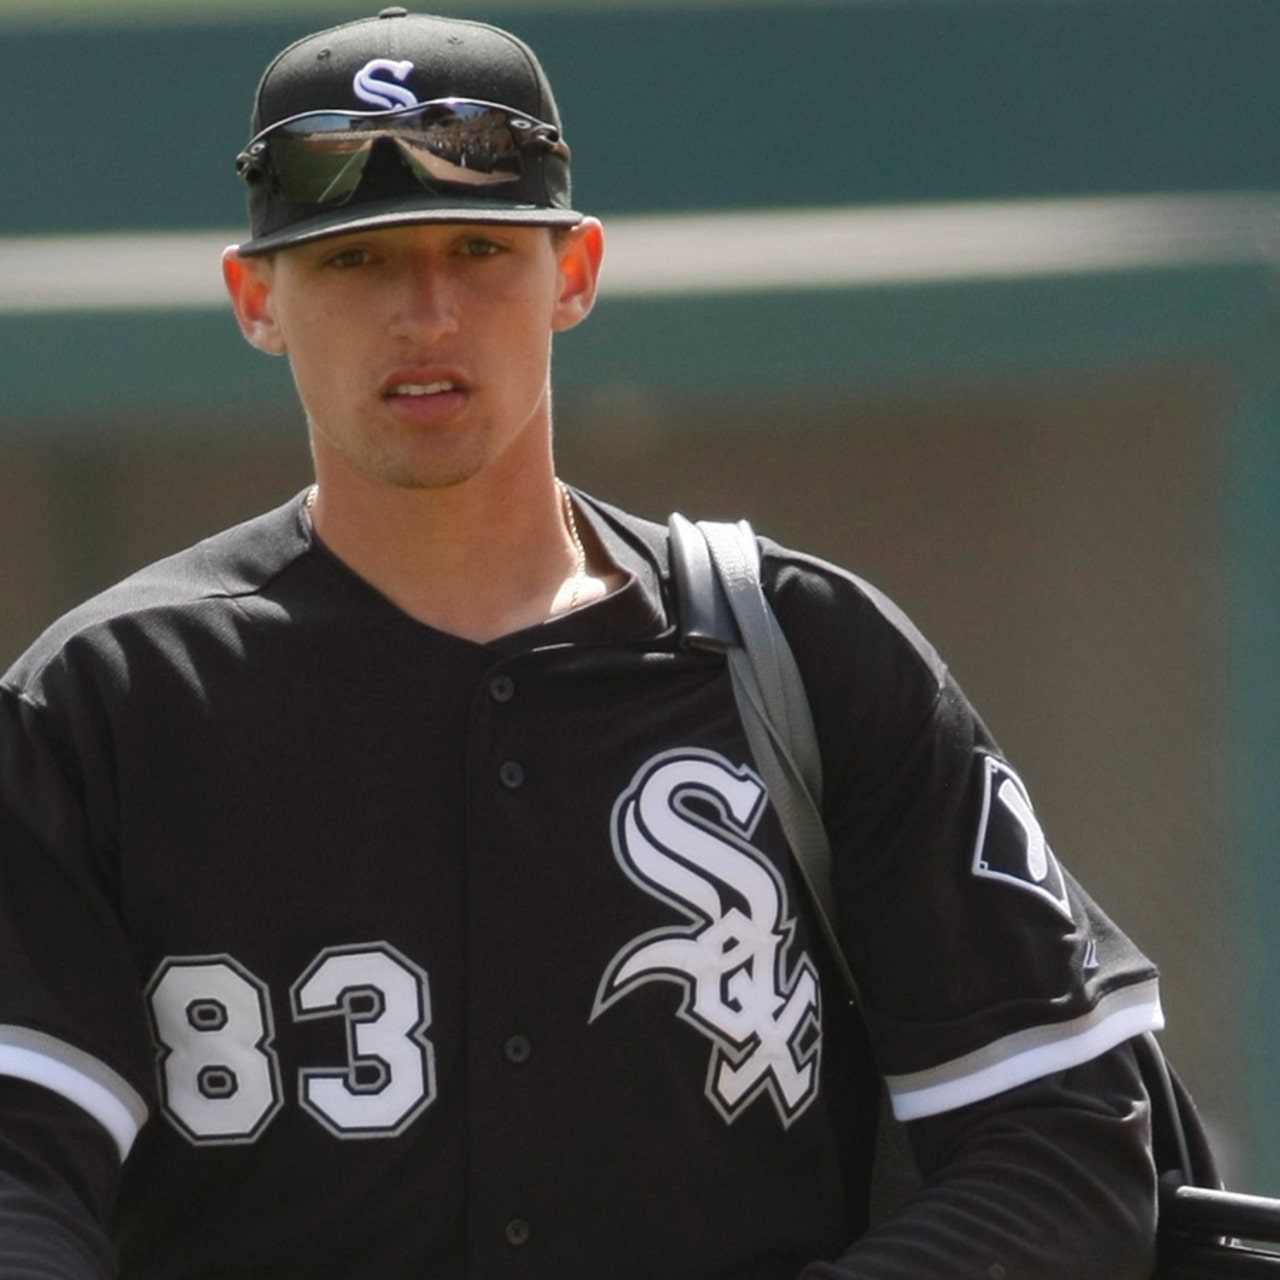 White Sox call up OF Trayce Thompson, brother of NBA star Klay Thompson